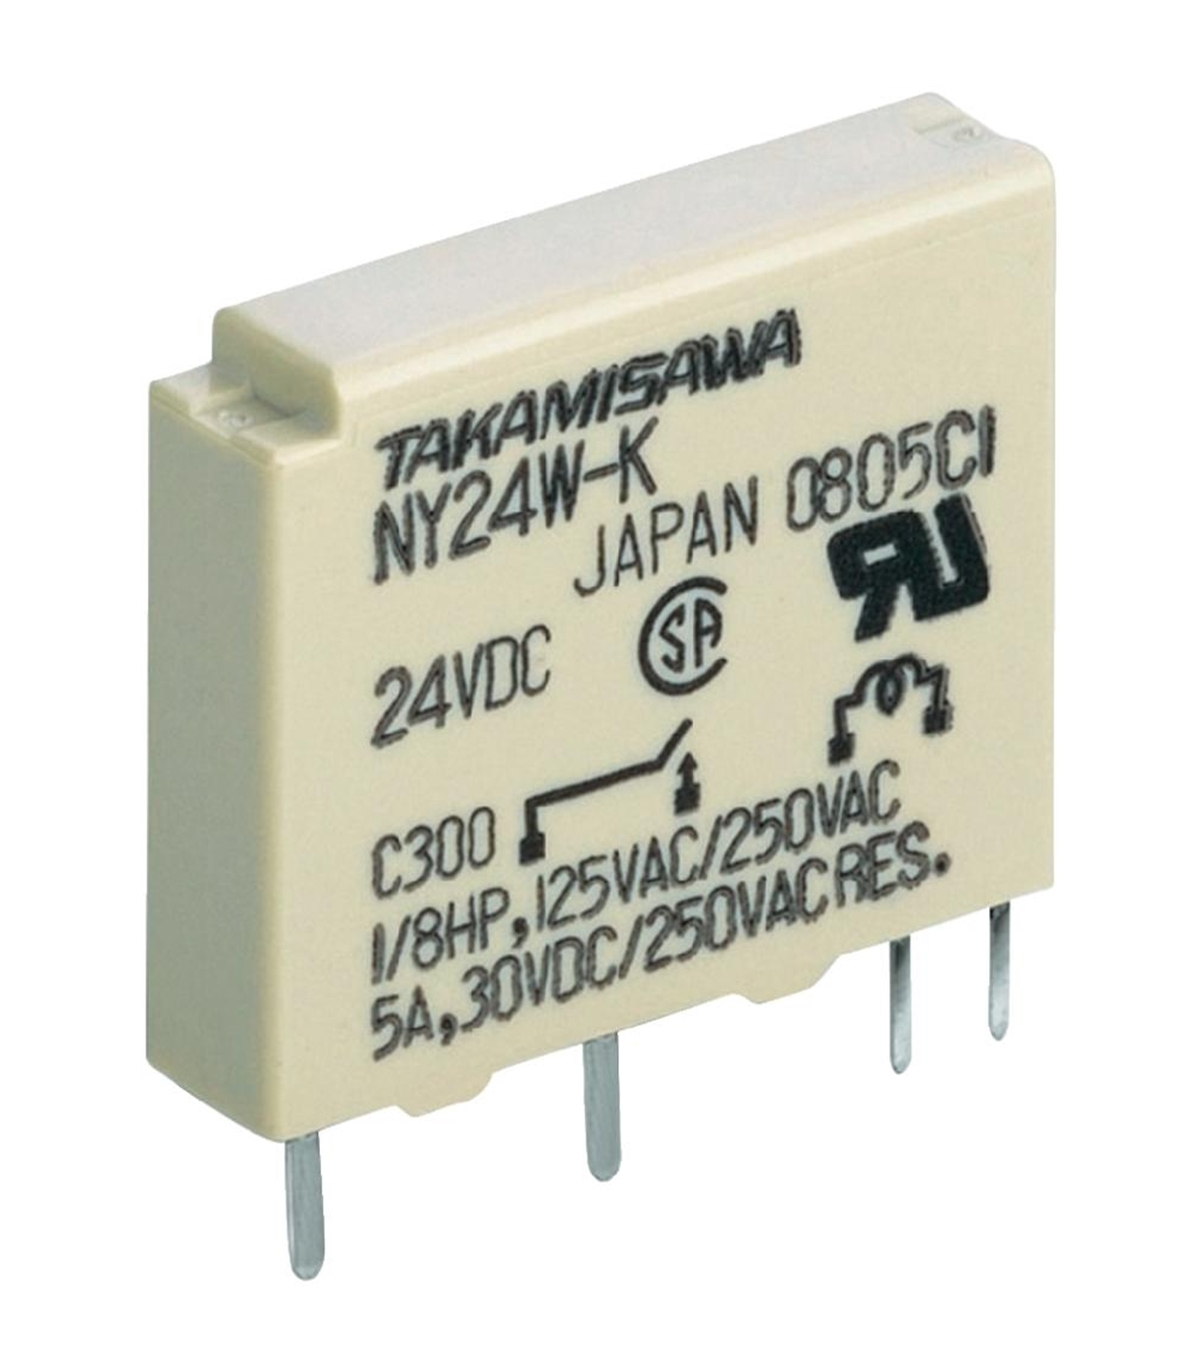 NY-24W-K Relay electromagnetic SPST-NO Ucoil24VDC 5A//250VAC 5A//30VDC